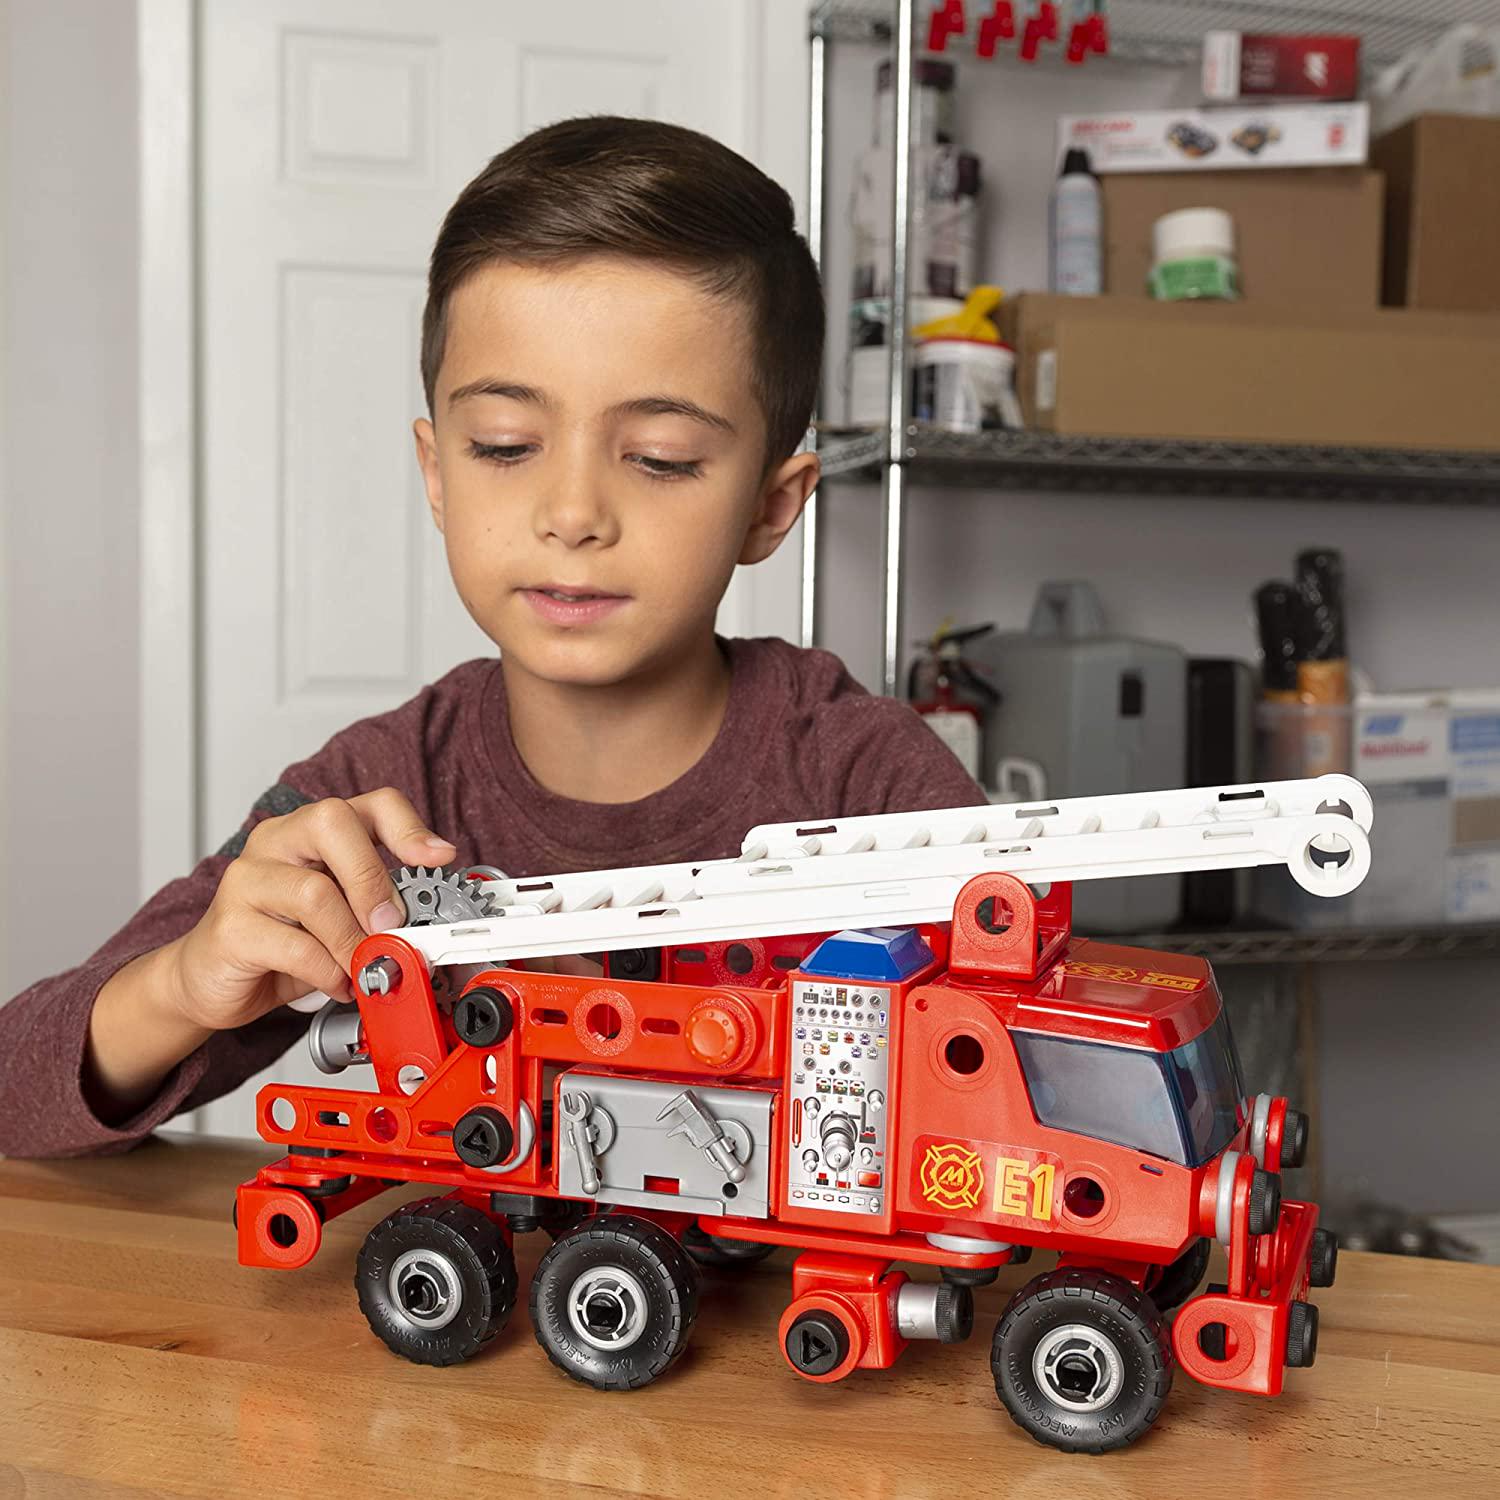 MECCANO, Meccano Junior Rescue Fire Truck with Lights and Sounds Model Building Kit